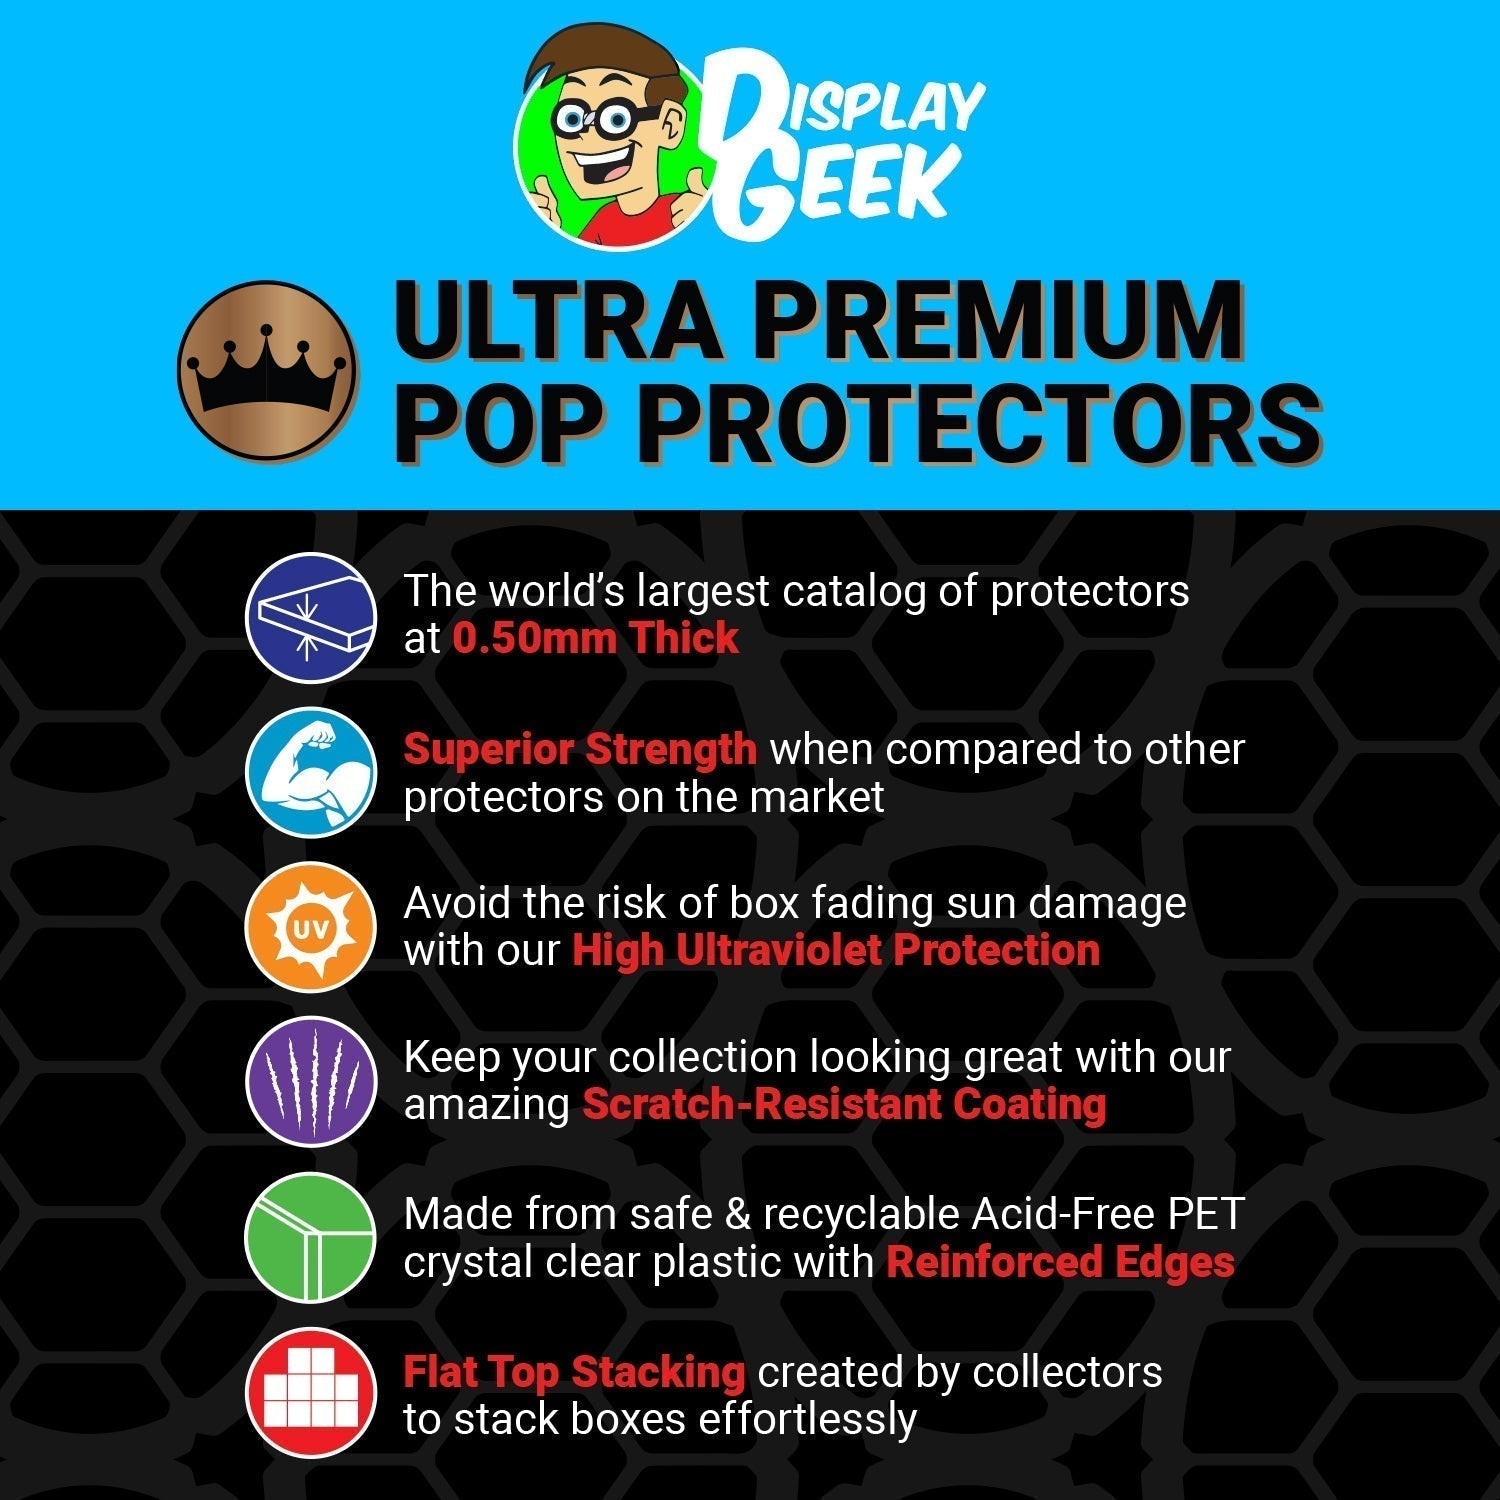 Pop Protector for 6 inch Treasure Skeleton #783 Super Funko Pop - PPG Pop Protector Guide Search Created by Display Geek